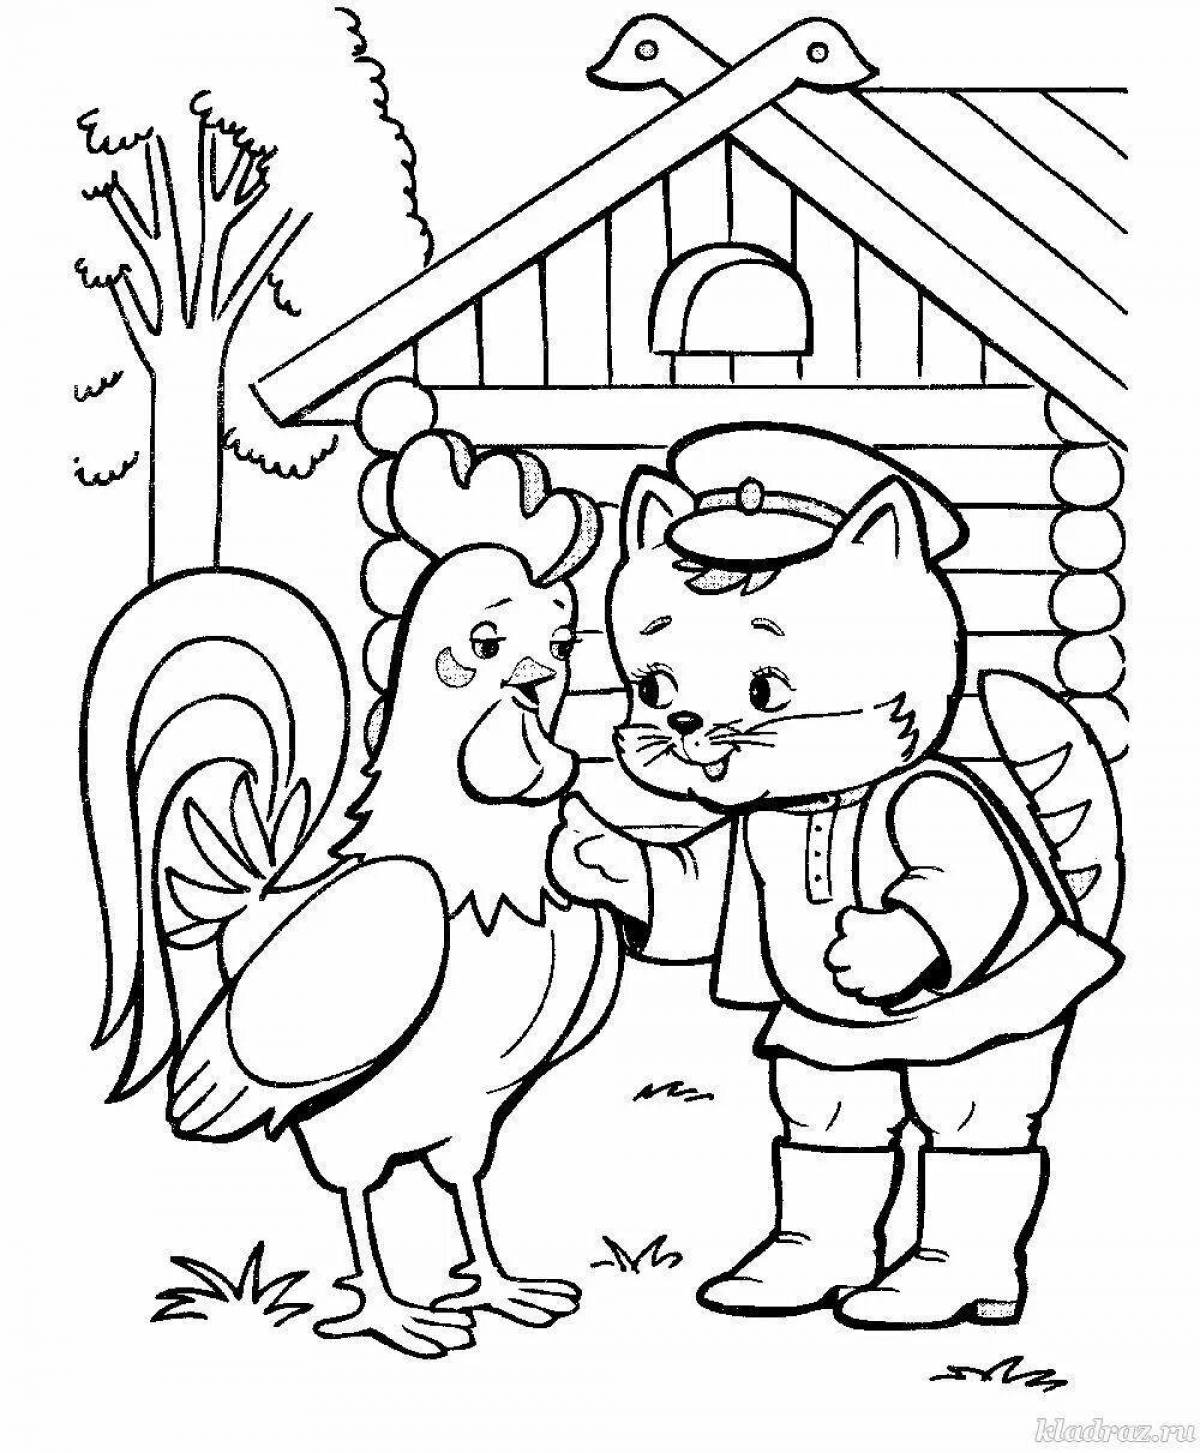 Funny coloring fox and rooster Russian folk tale